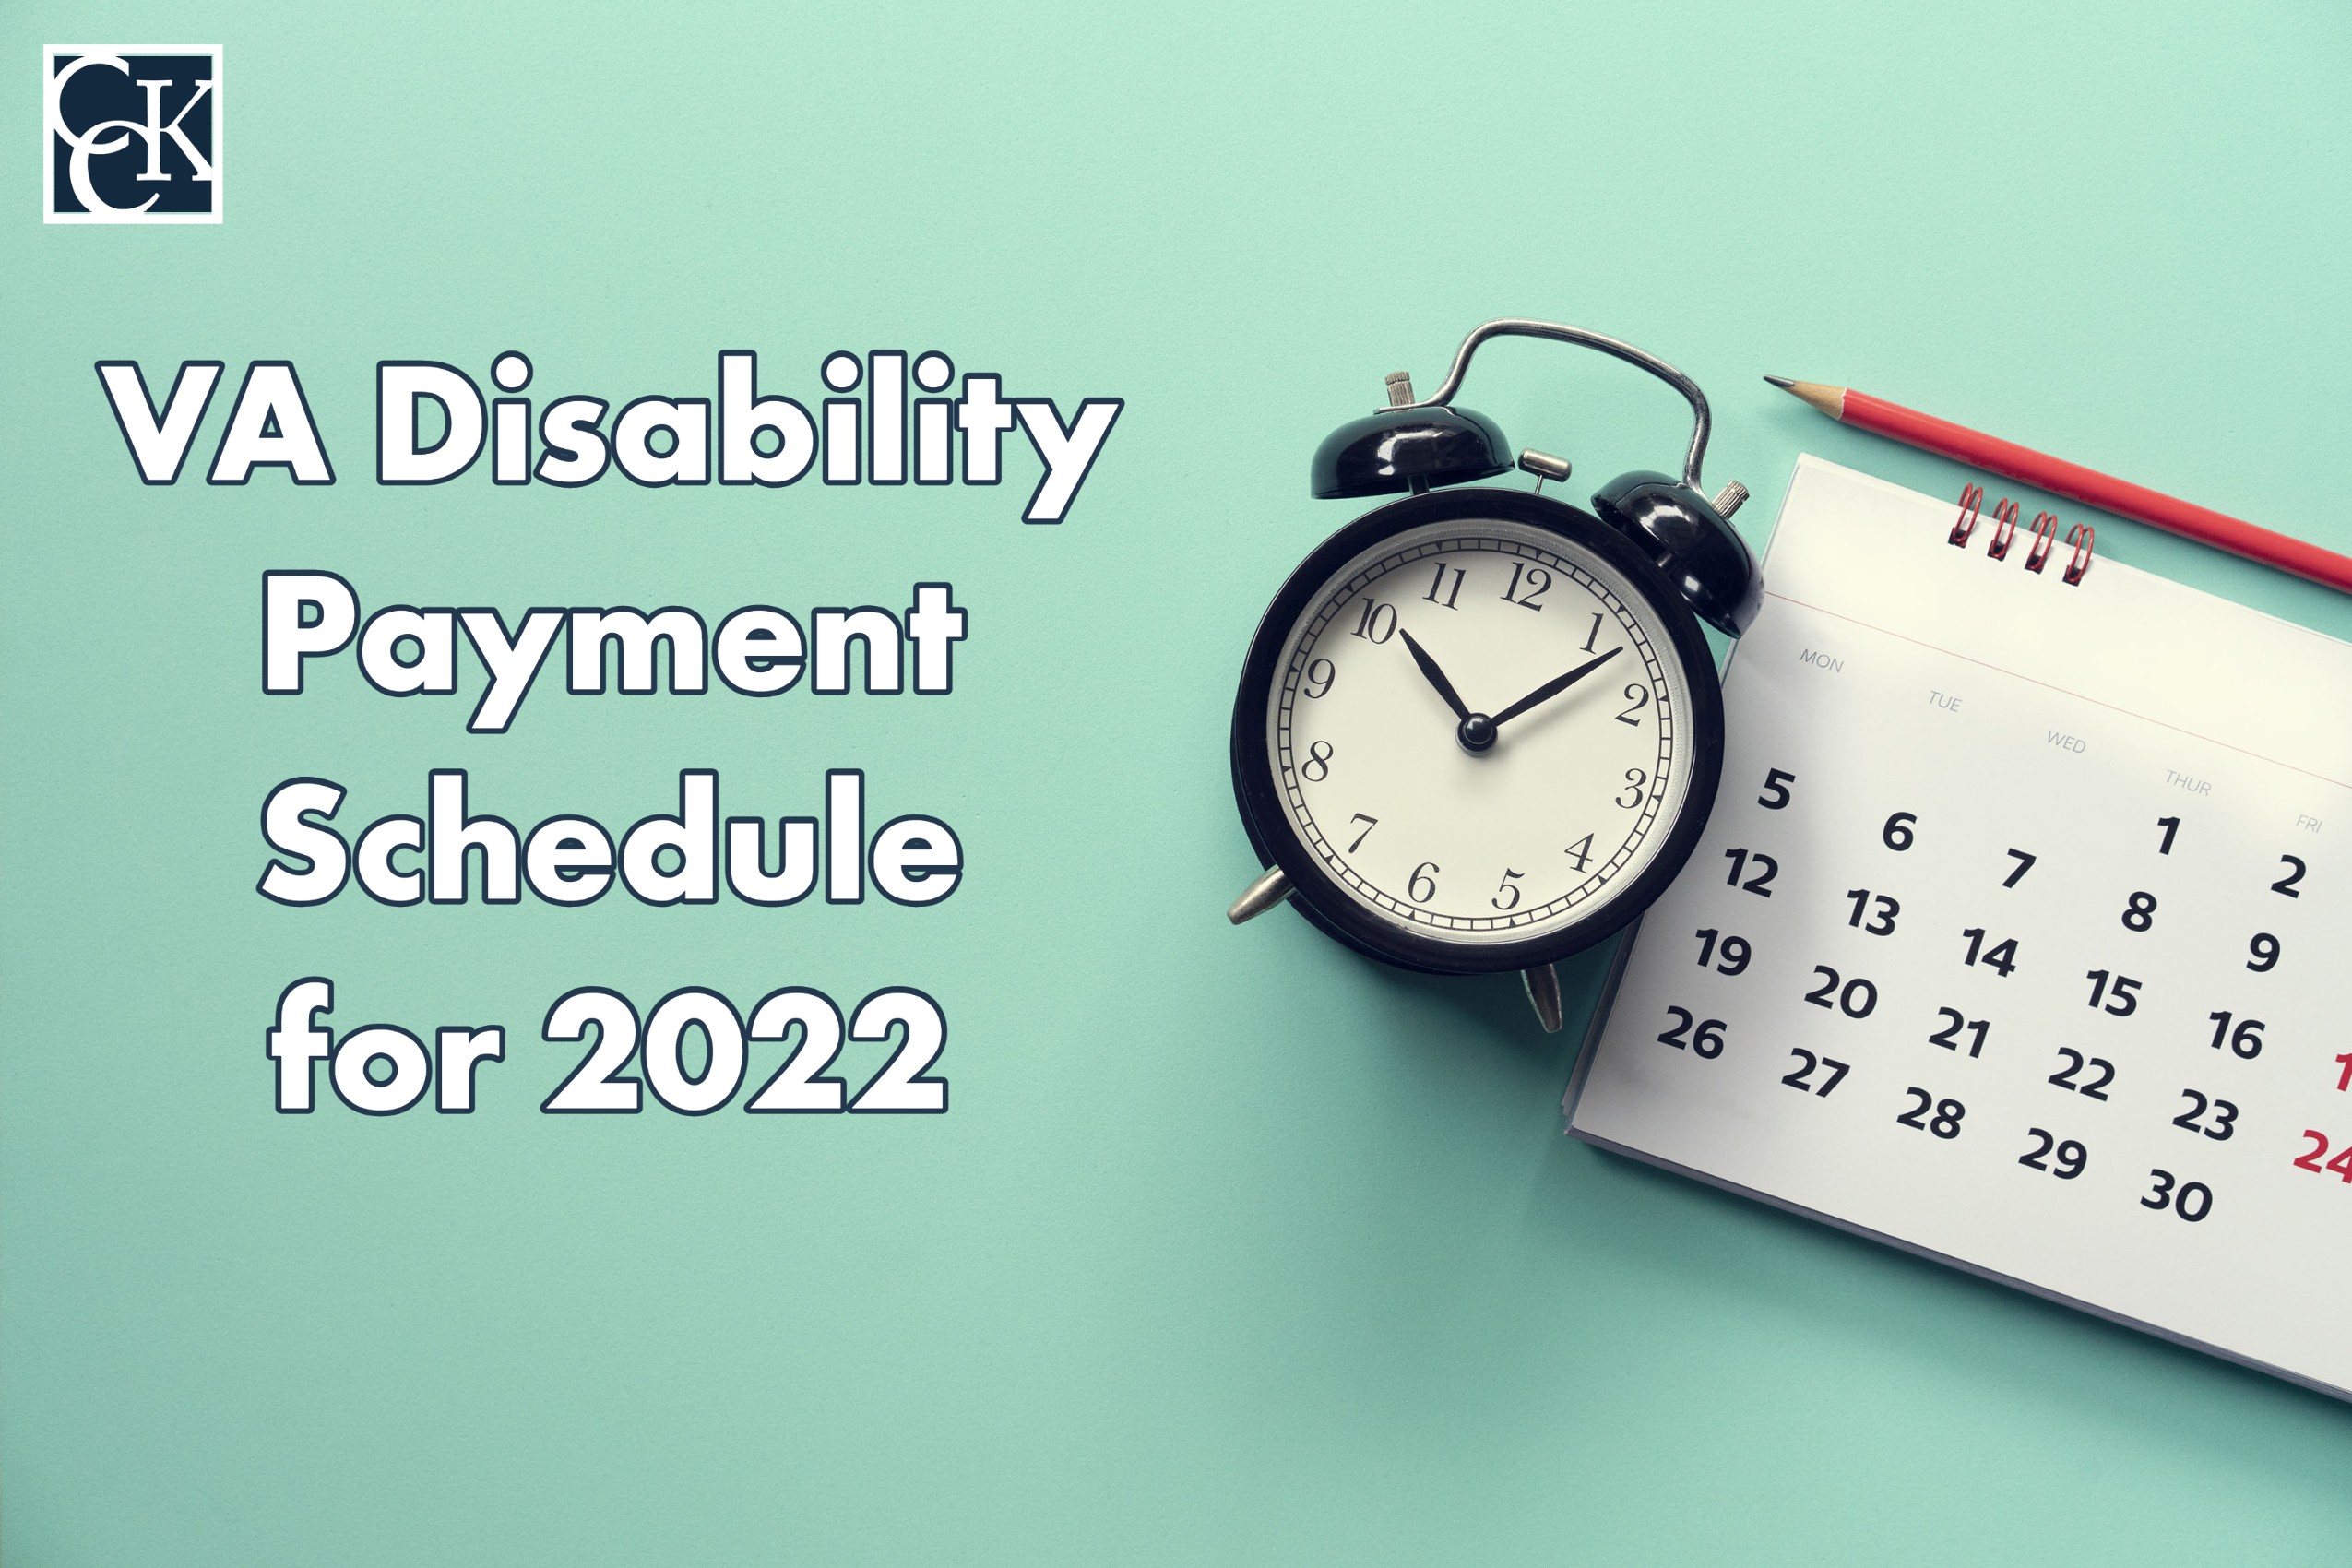 va-disability-payment-schedule-for-2022-cck-law